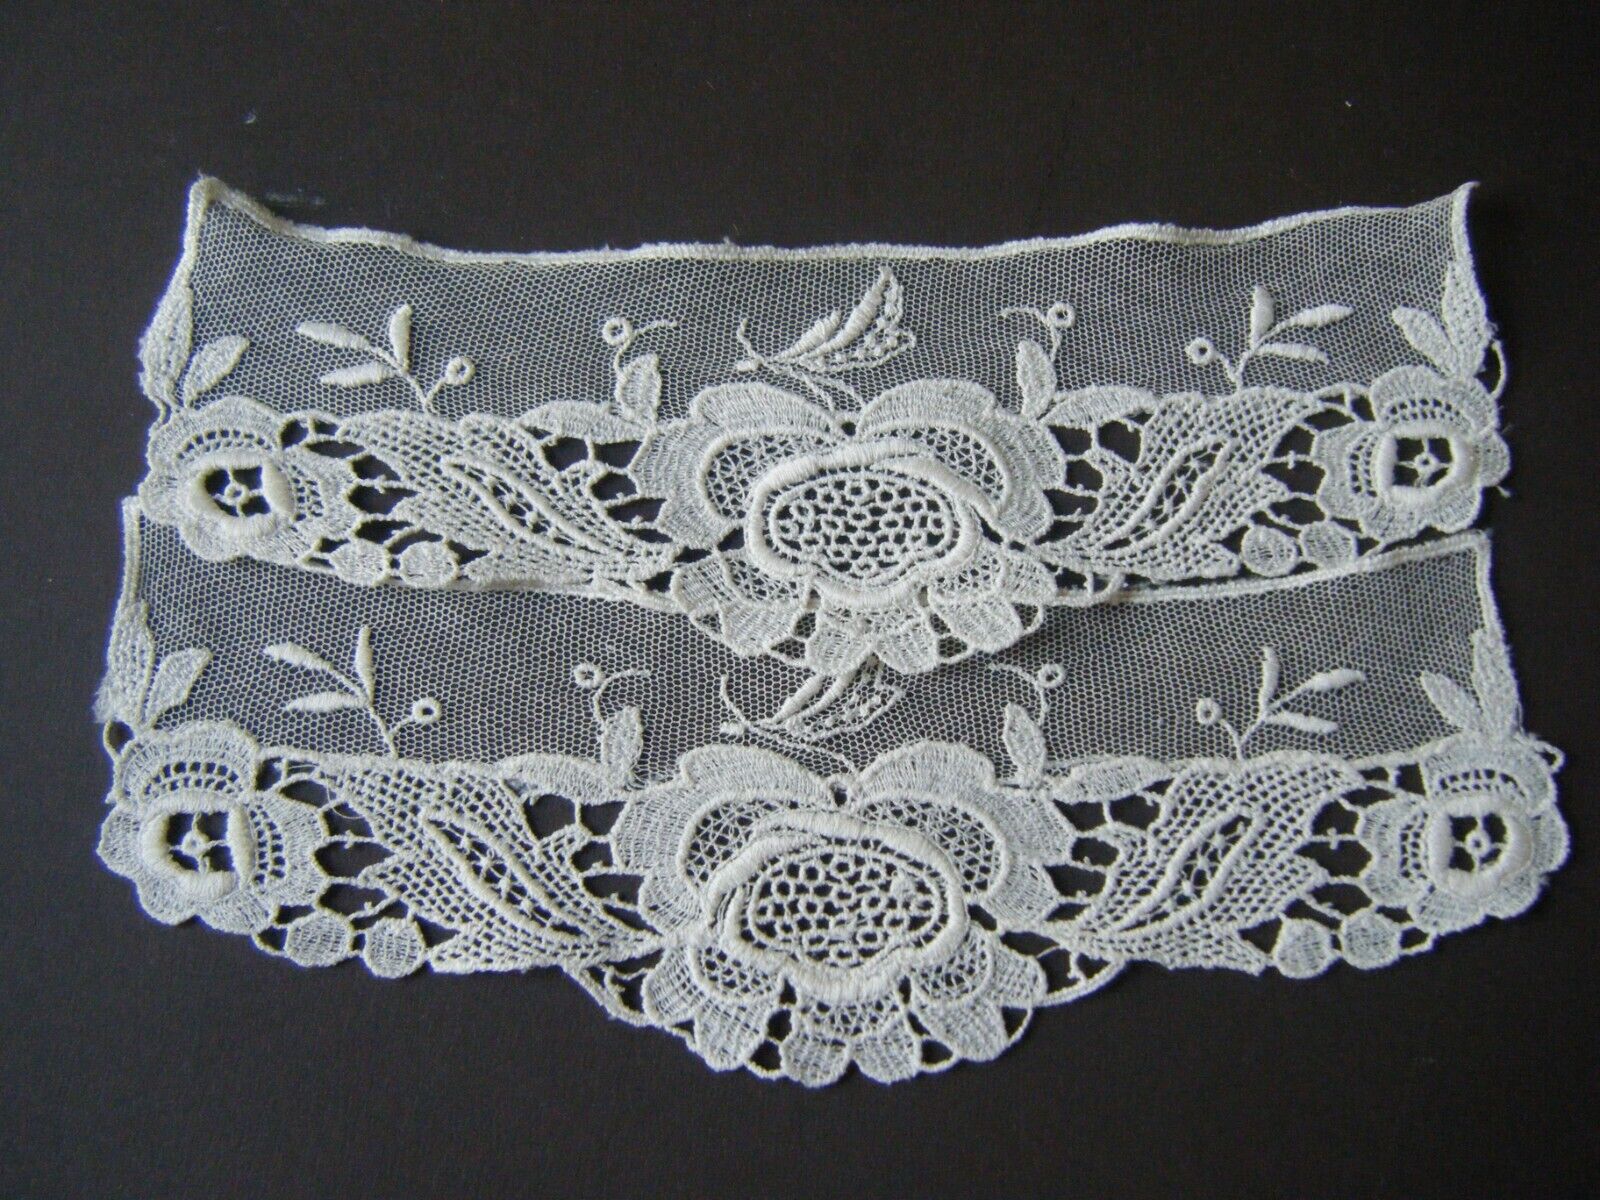 Antique old pair cuffs combo Schiffli mesh lace w 3d rose embroidered design.